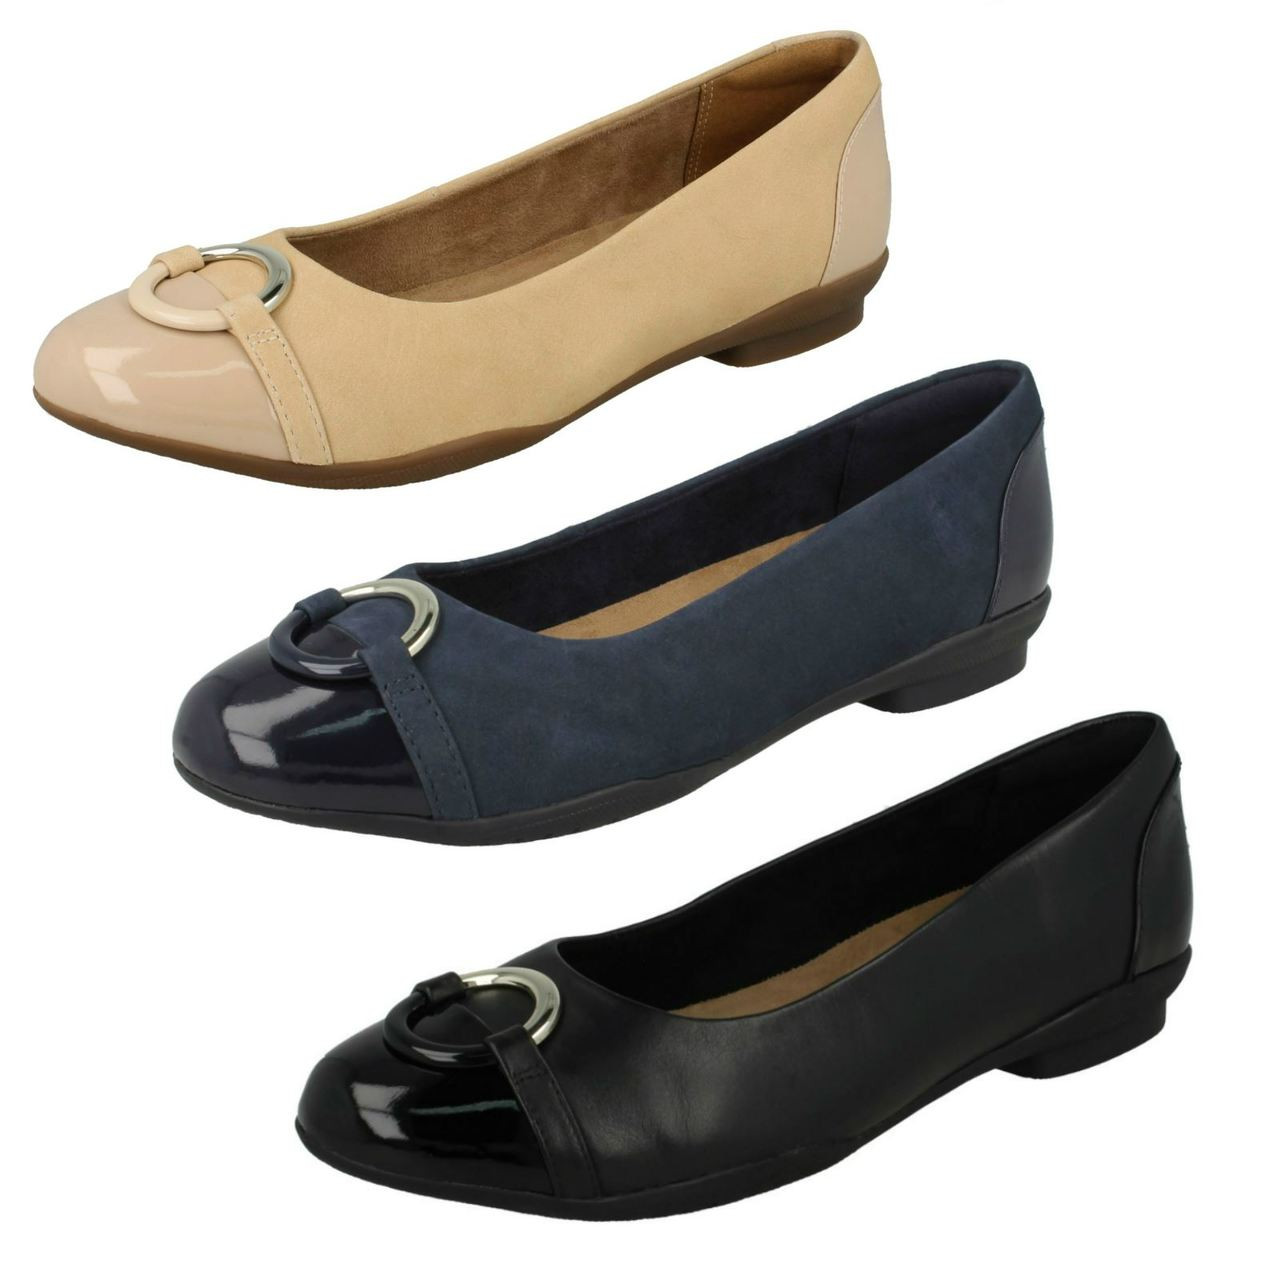 Ladies Clarks Ballerina Flat With Ring 